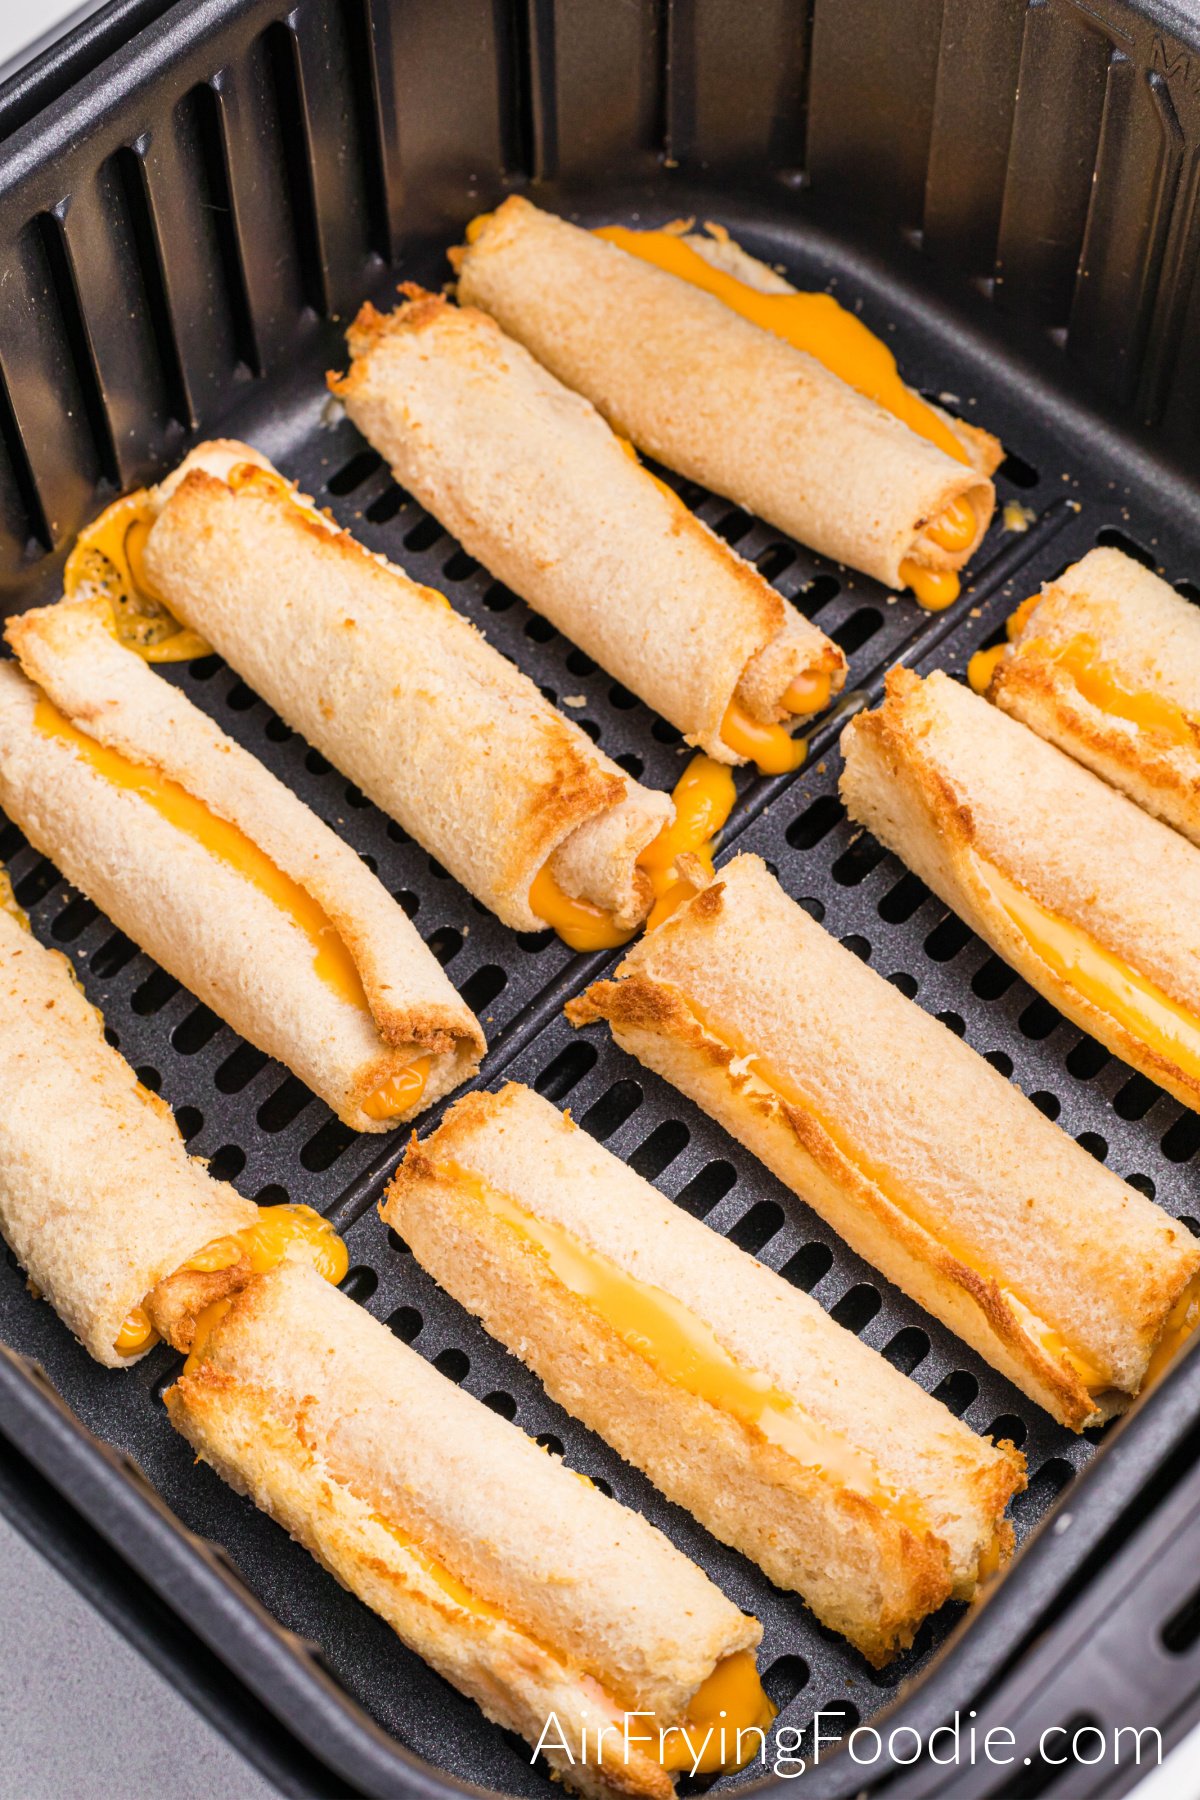 Close-up of fully cooked grilled cheese roll ups in the air fryer basket.